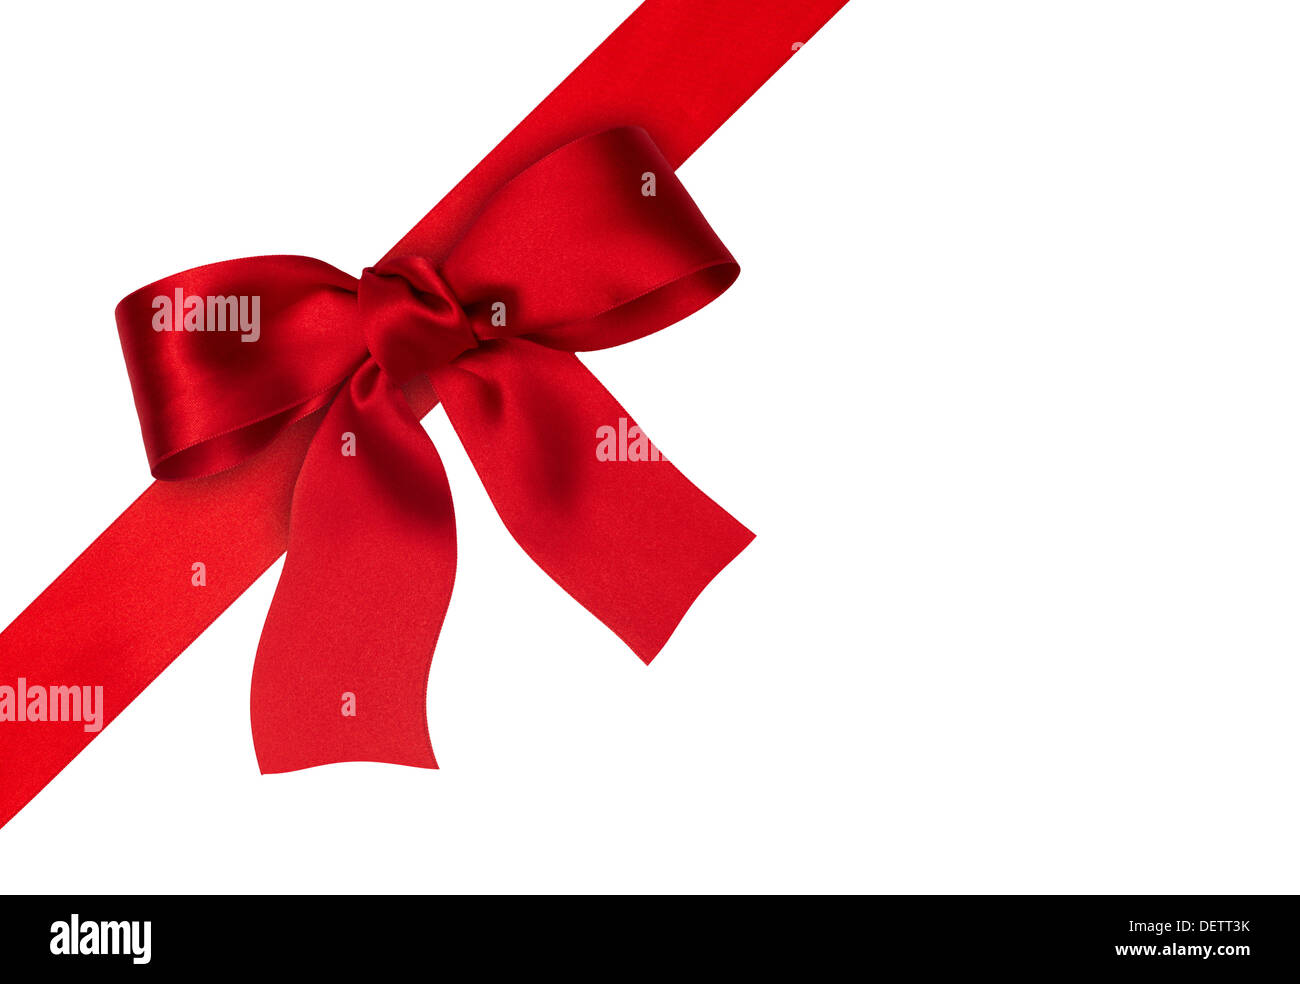 Thin, red and white ribbon is laid out on a plain white background